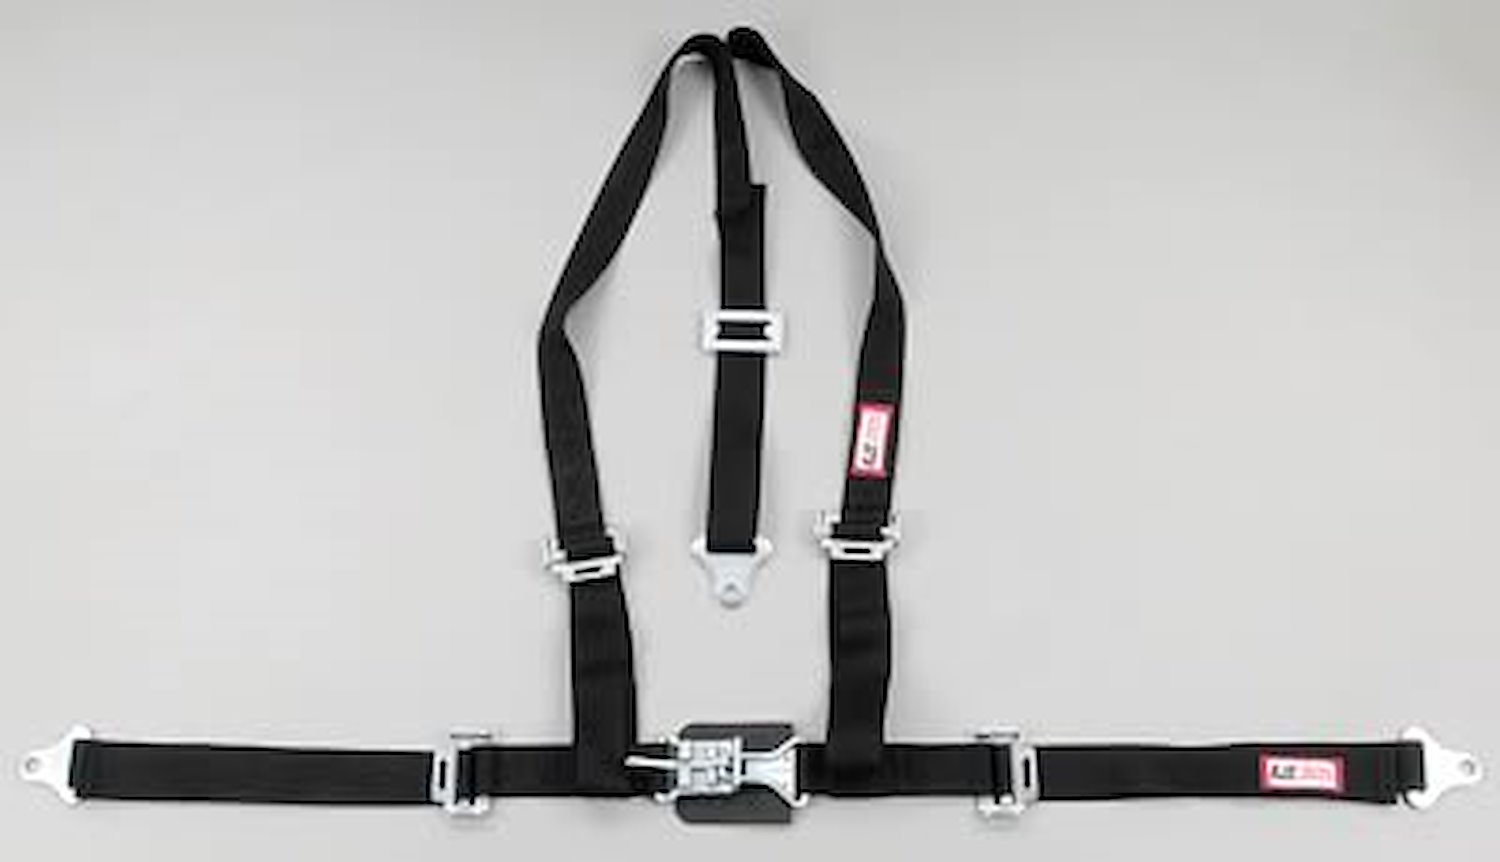 NON-SFI L&L HARNESS 2 PULL UP Lap Belt SEWN IN 2 S.H. INDIVIDUAL FLOOR Mount ALL WRAP ENDS KHAKI